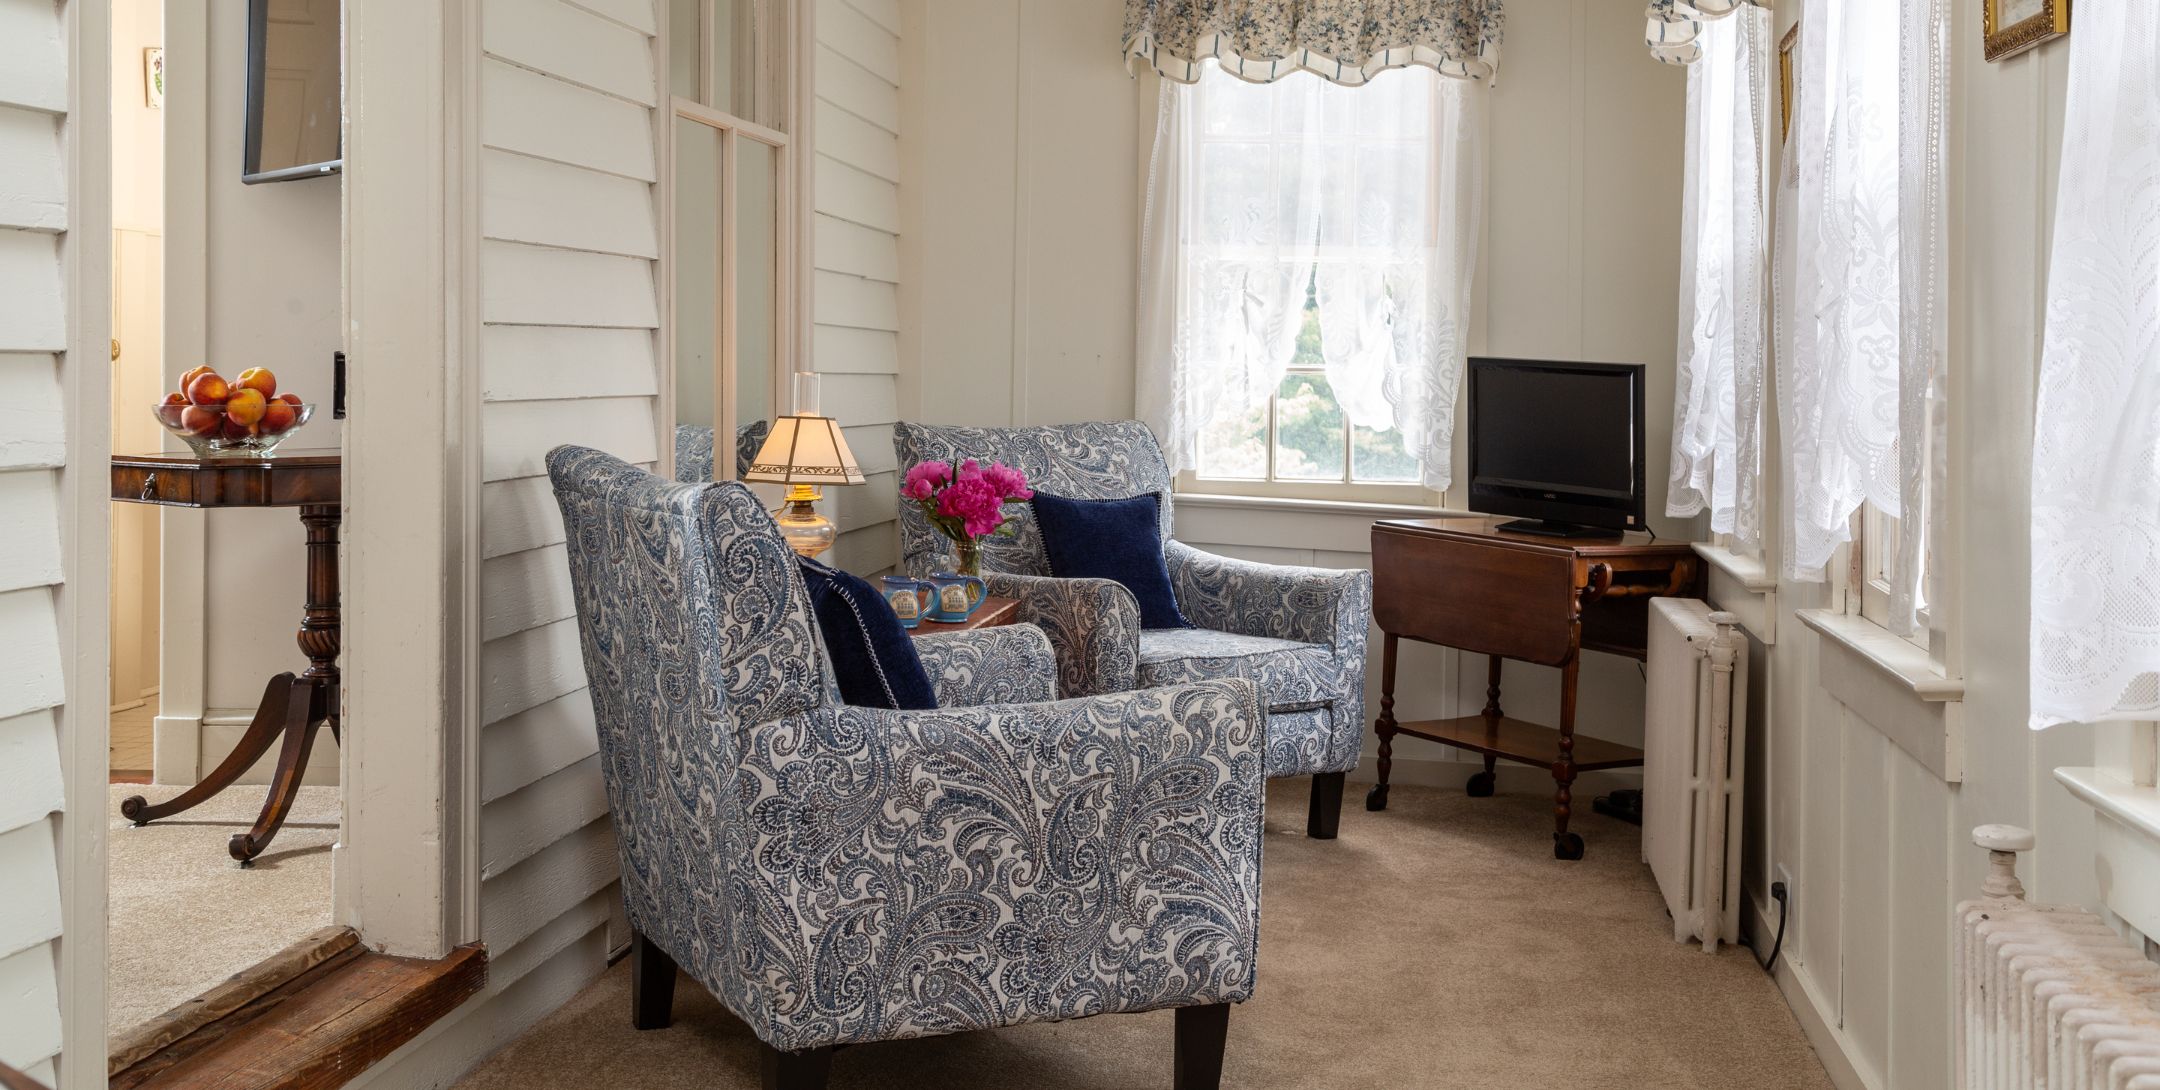 Two navy and white paisley chairs in a cozy carpeted room with window and TV